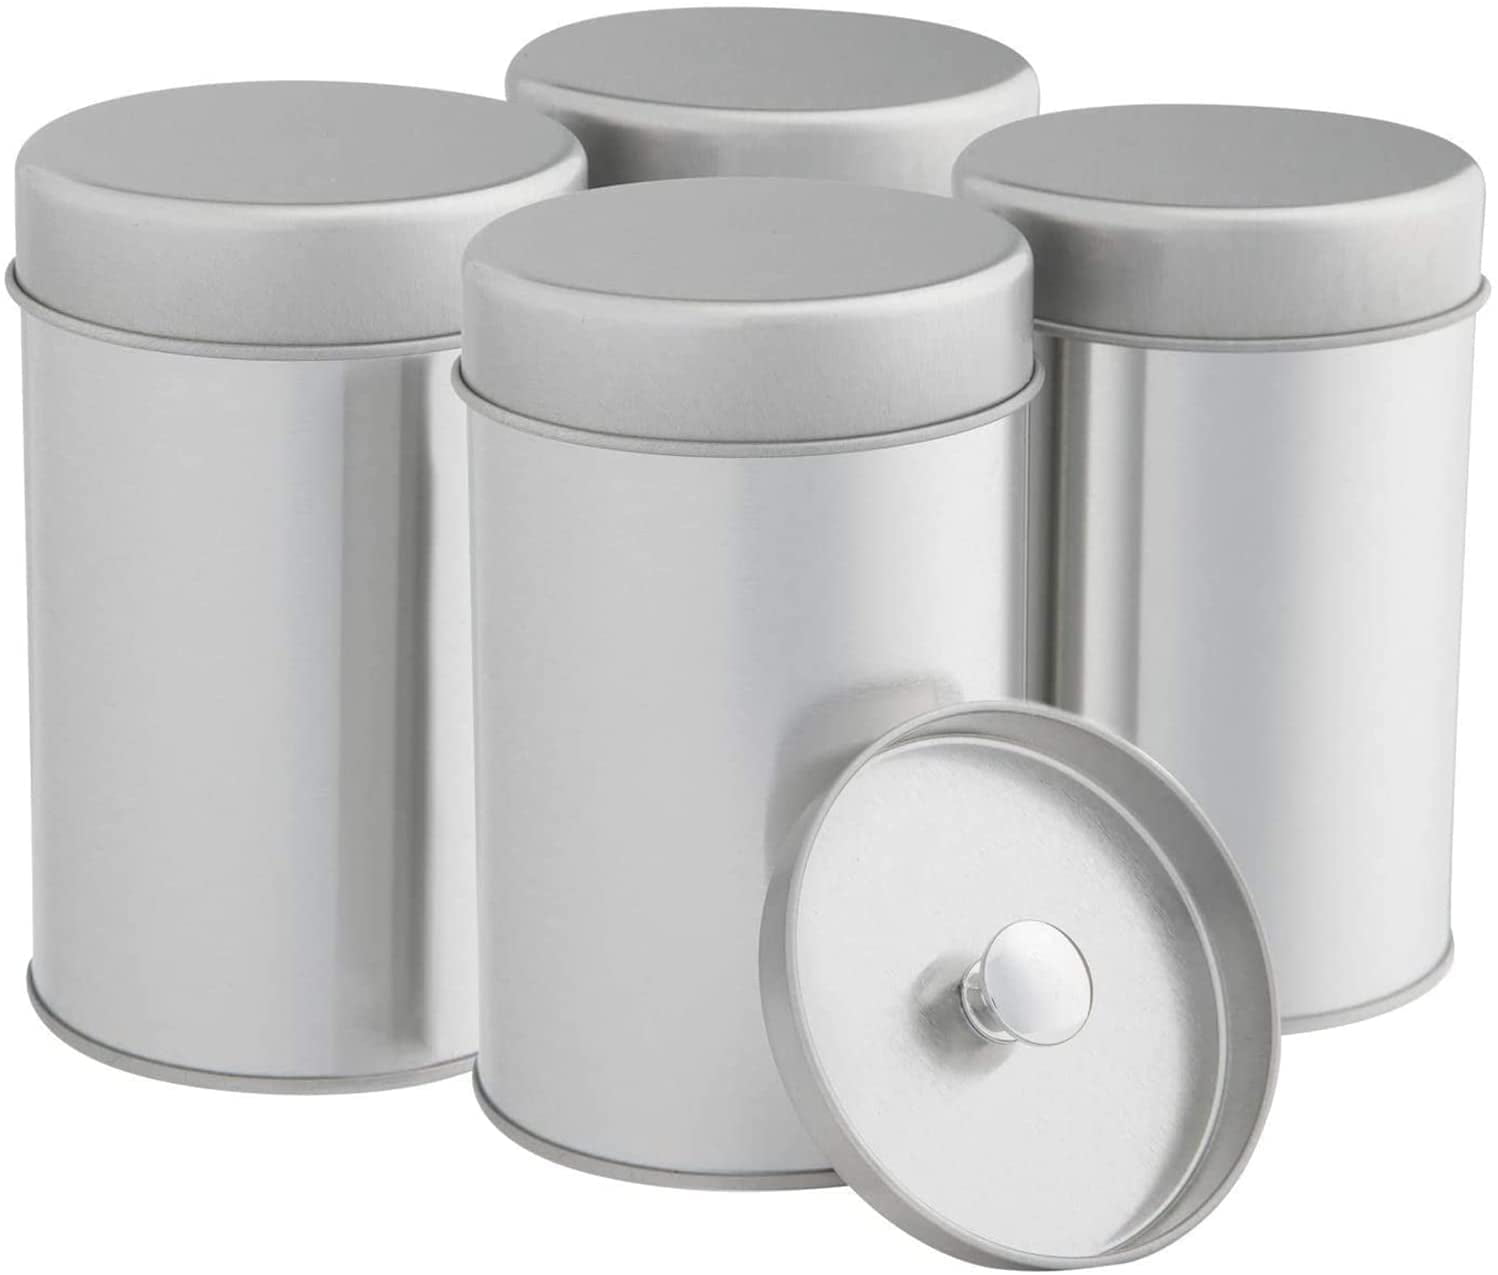 Small Kitchen Canisters for Tea Coffee Sugar Storage Loose Leaf Tea Tin Containers by SilverOnyx Tea Tin Canister with Airtight Double Lids for Loose Tea Tea Canister 1 pc 